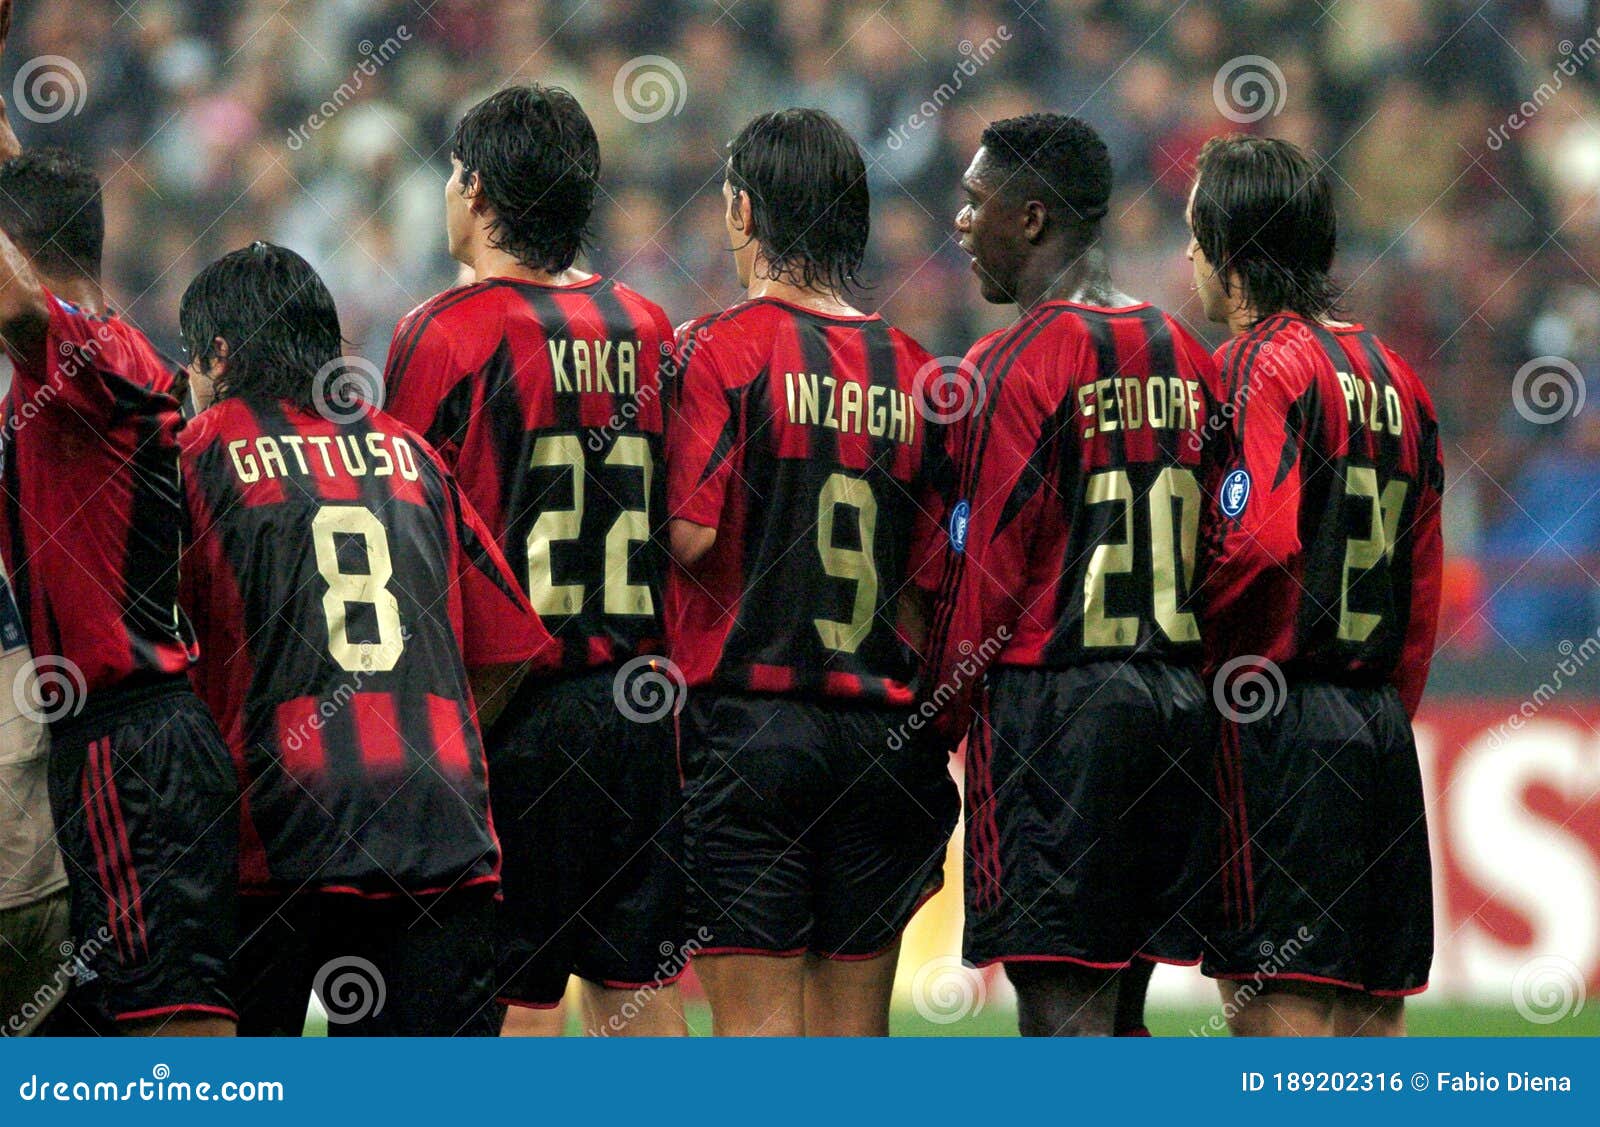 Solskoldning Spild Rust The Milan Players, Gattuso,Kaka,Inzaghi,Seedorf and Pirlo, are in Barrier  Waiting for the Free Kick Editorial Photo - Image of playing, barrier:  189202316